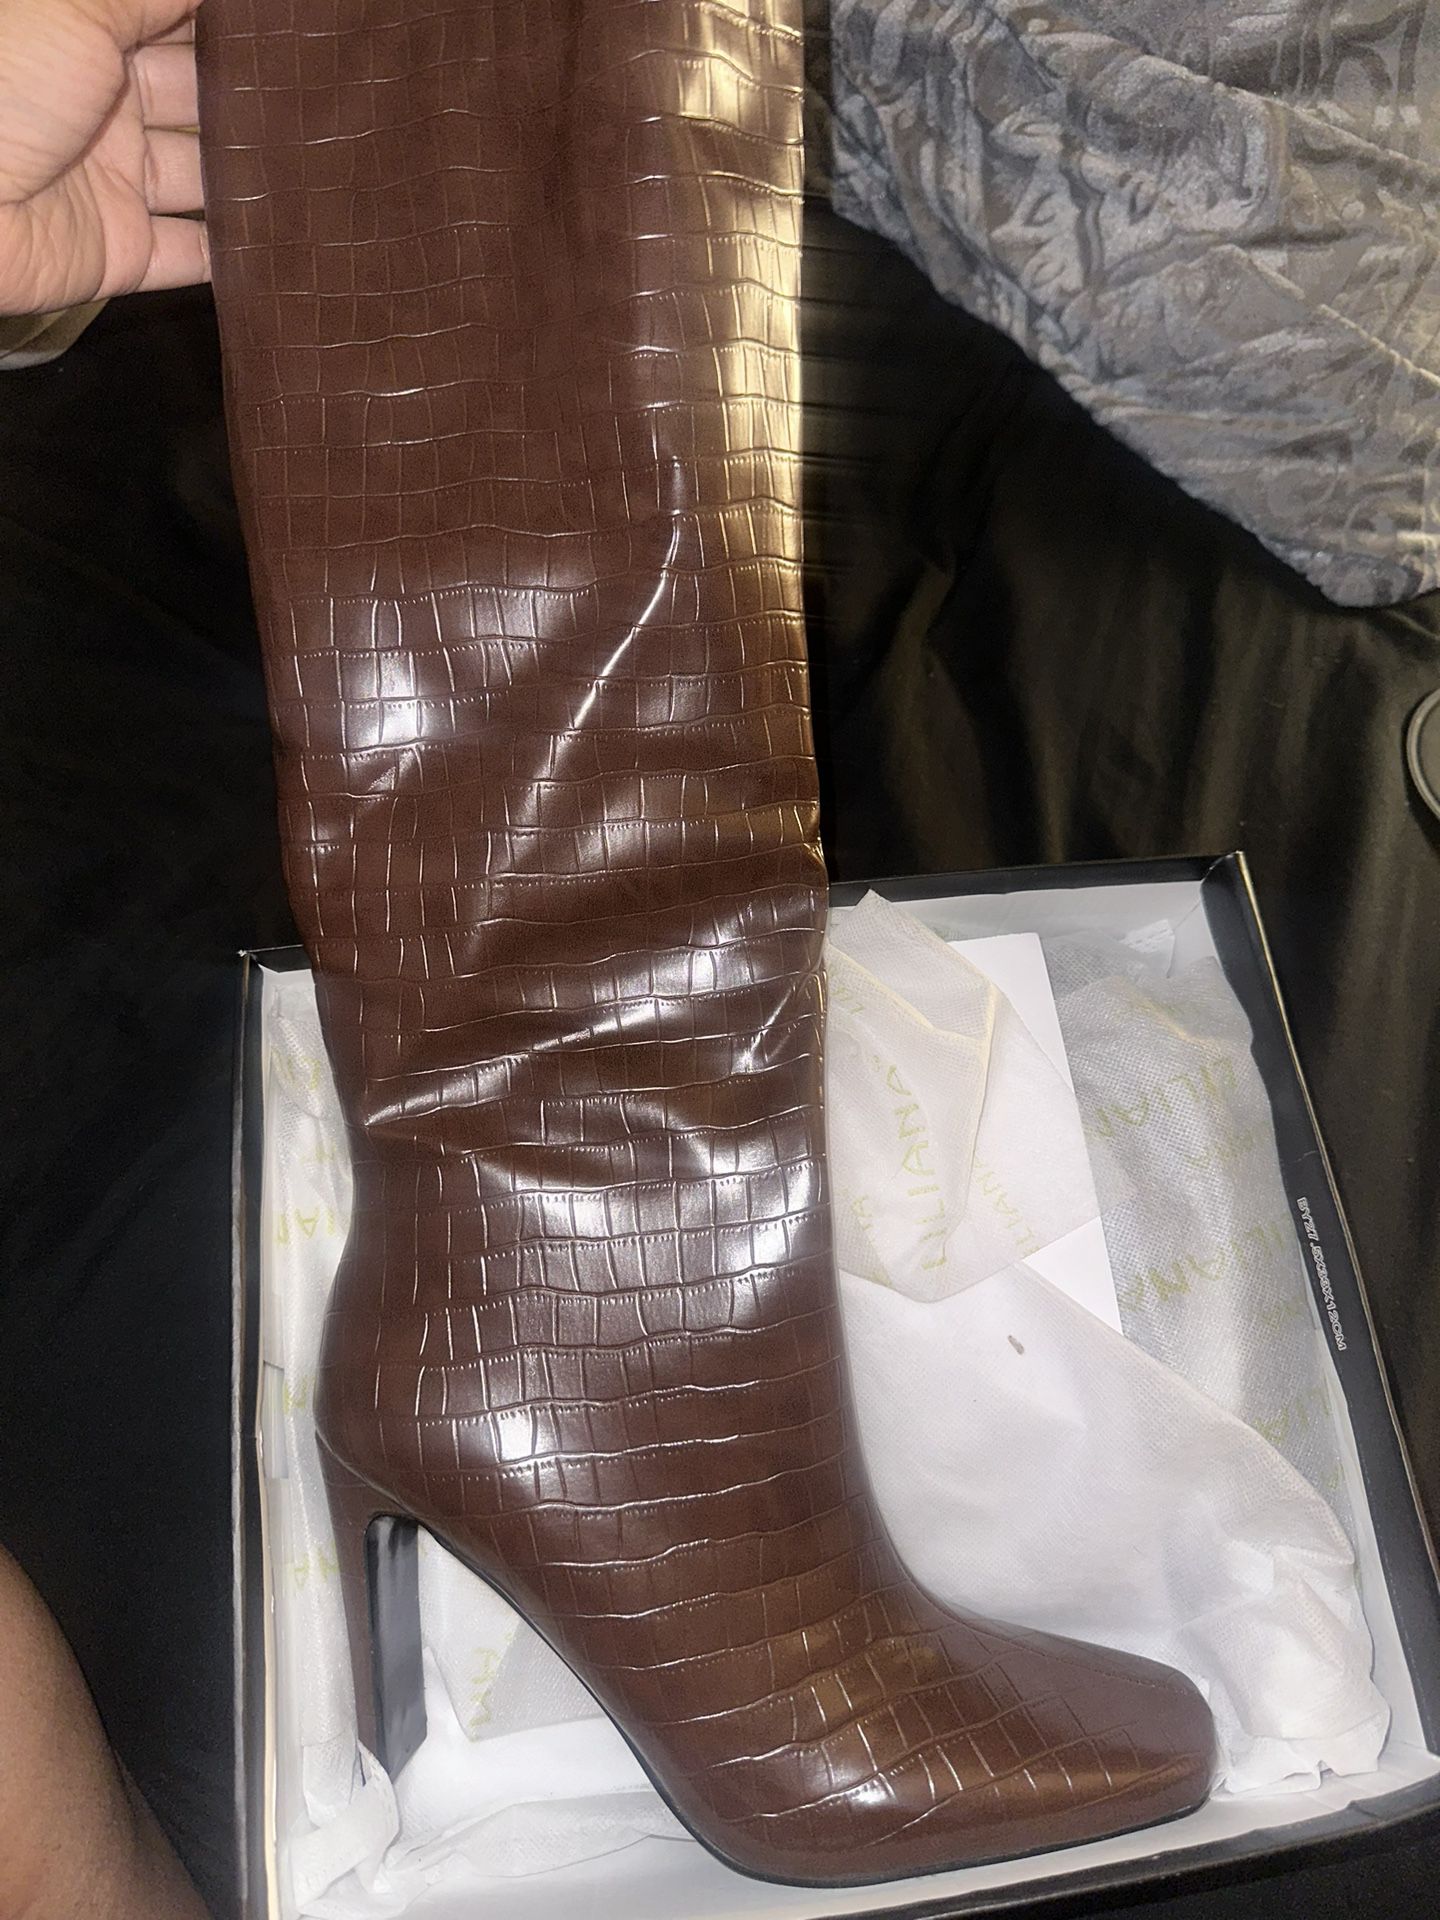 Brand New Chocolate Knee High Woman's Boots